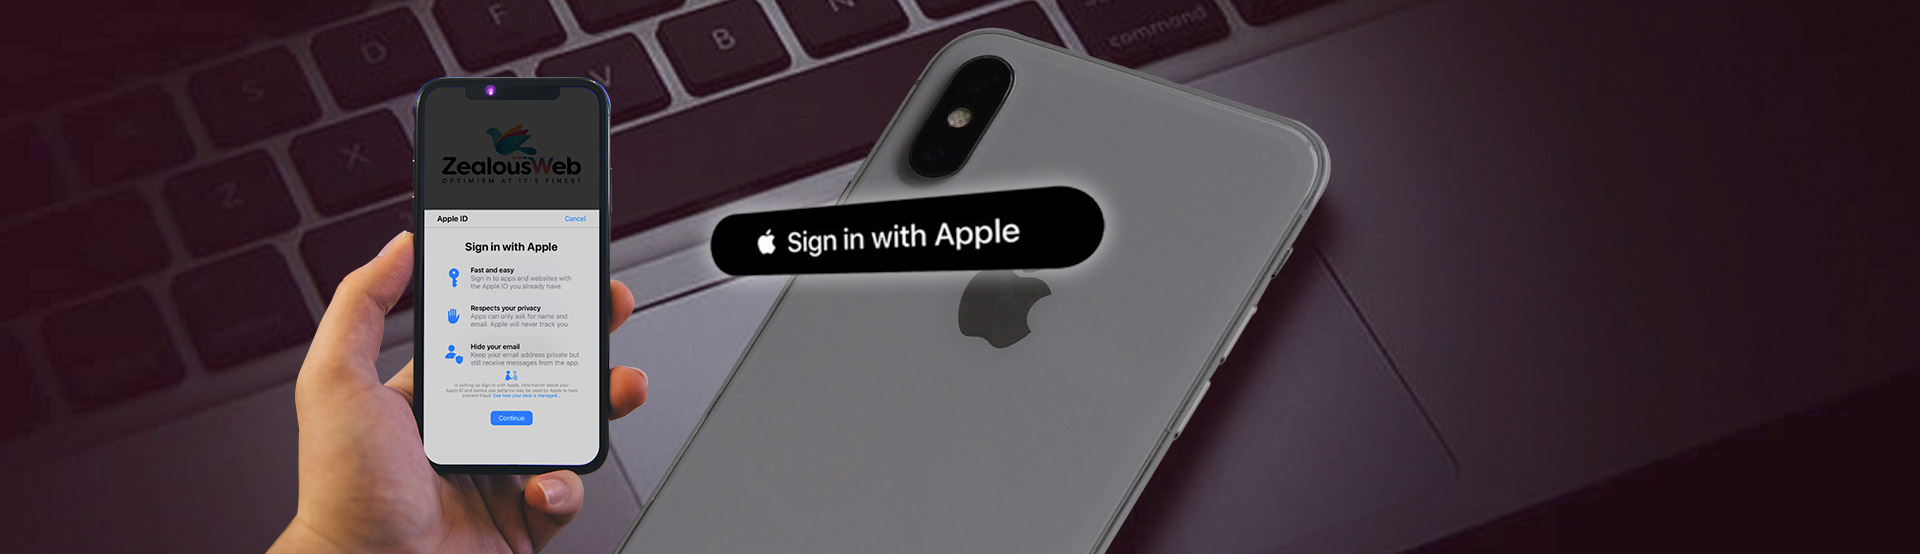 How to enable Sign-In With Apple In Your IoS Device?